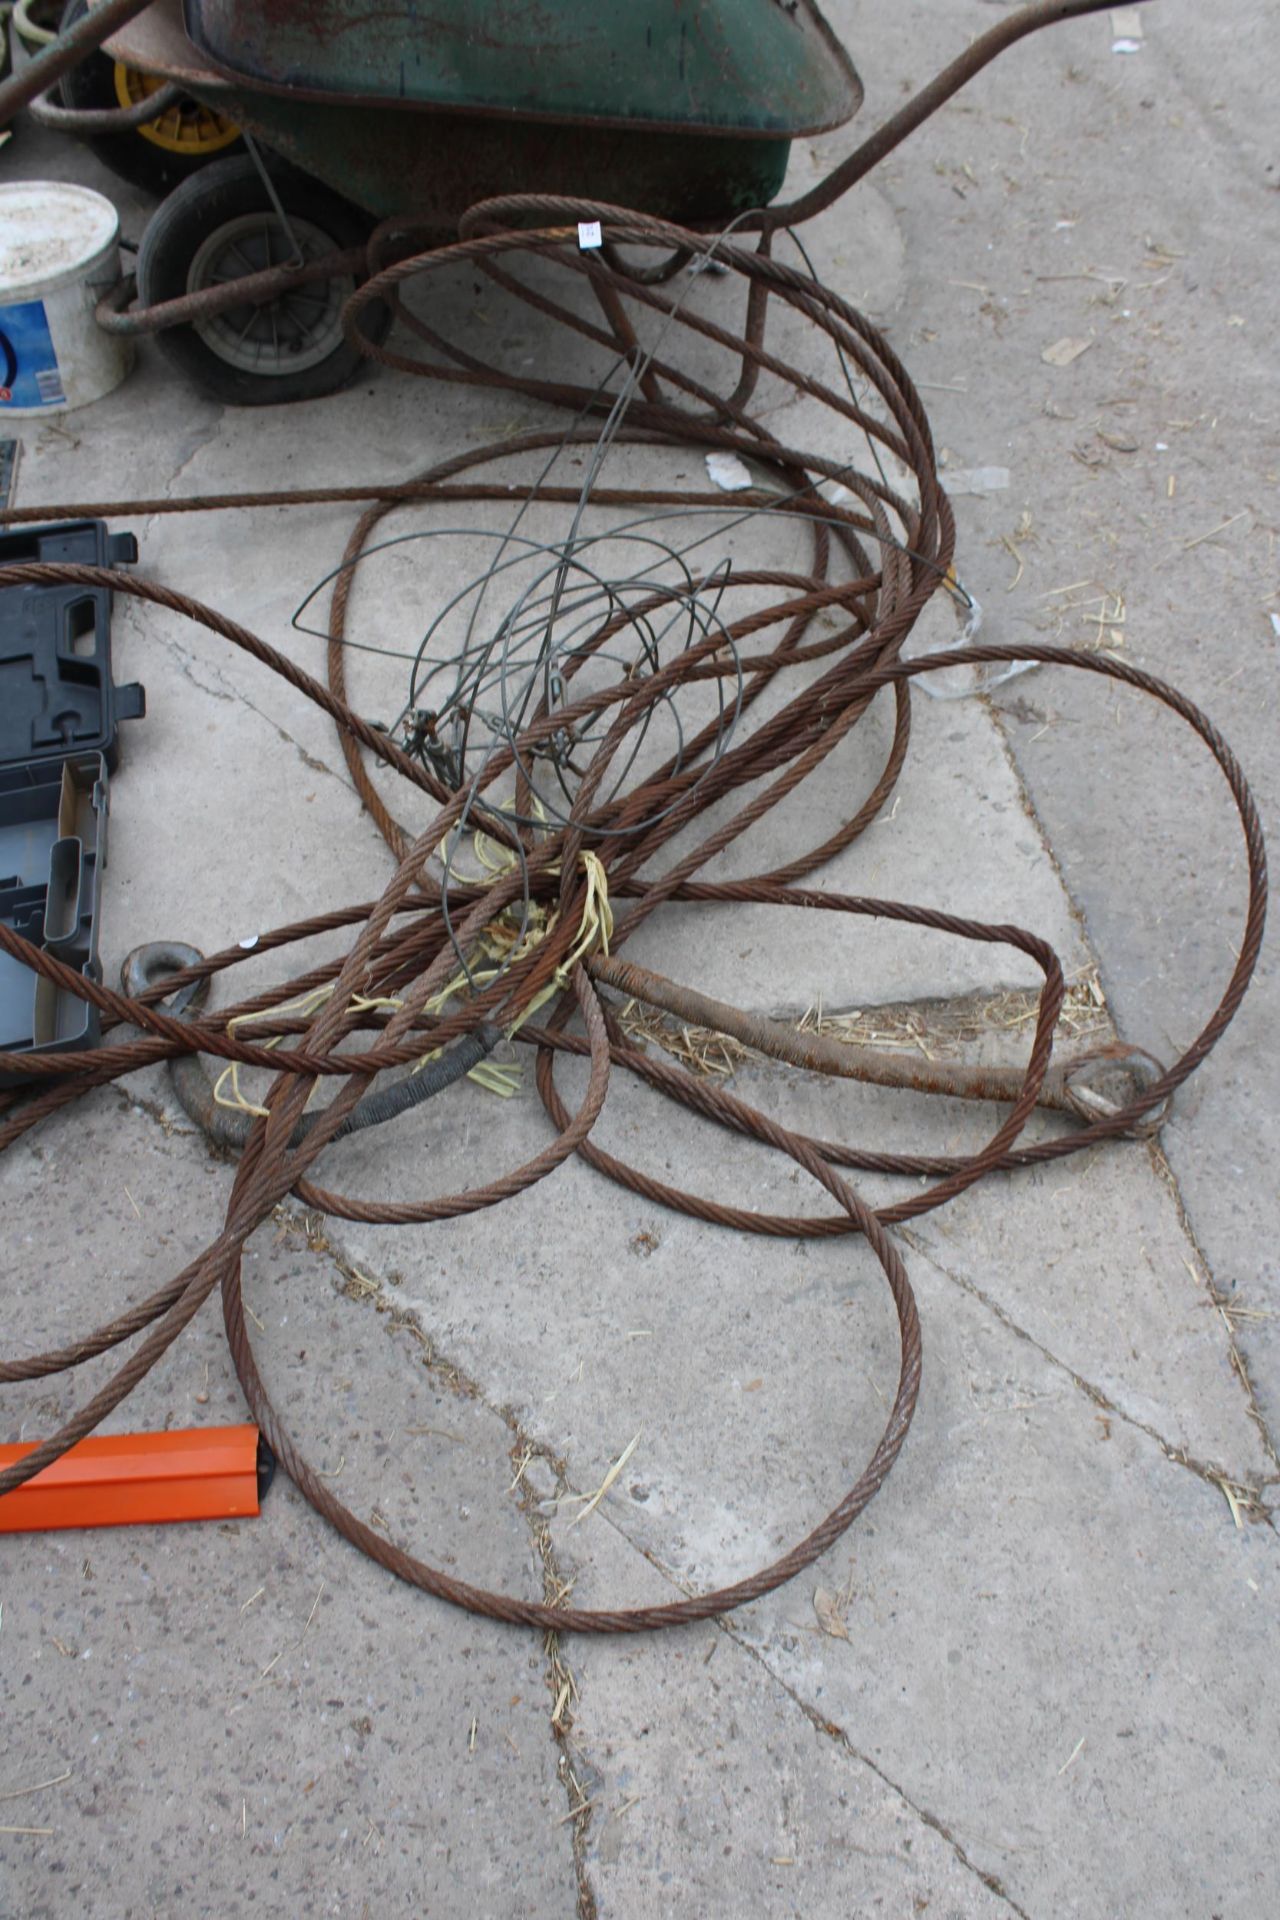 A HEAVY DUTY TOWING WIRE ROPE - Image 2 of 2